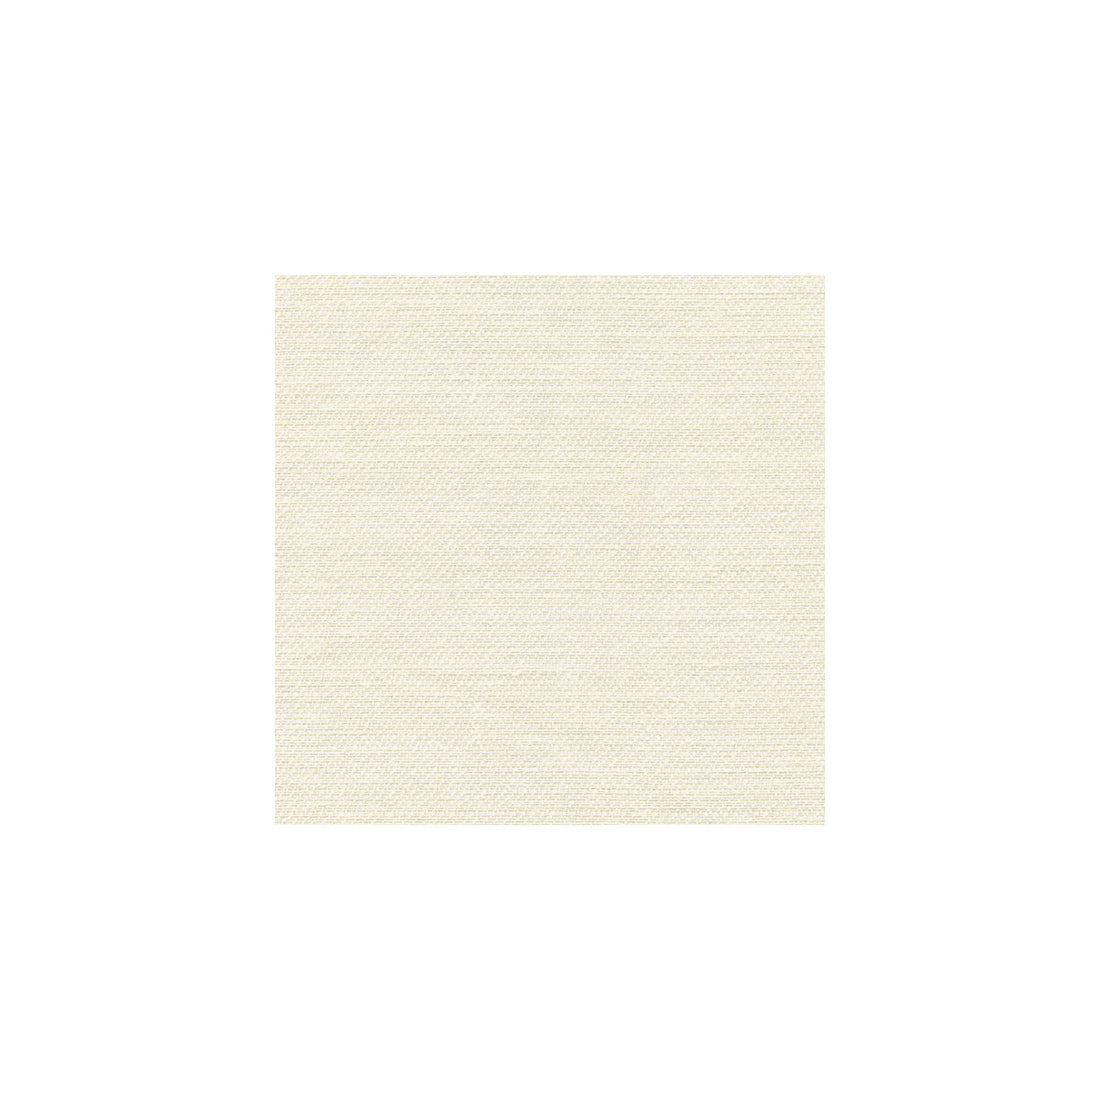 Linen Air fabric in blanc color - pattern 3520.1.0 - by Kravet Couture